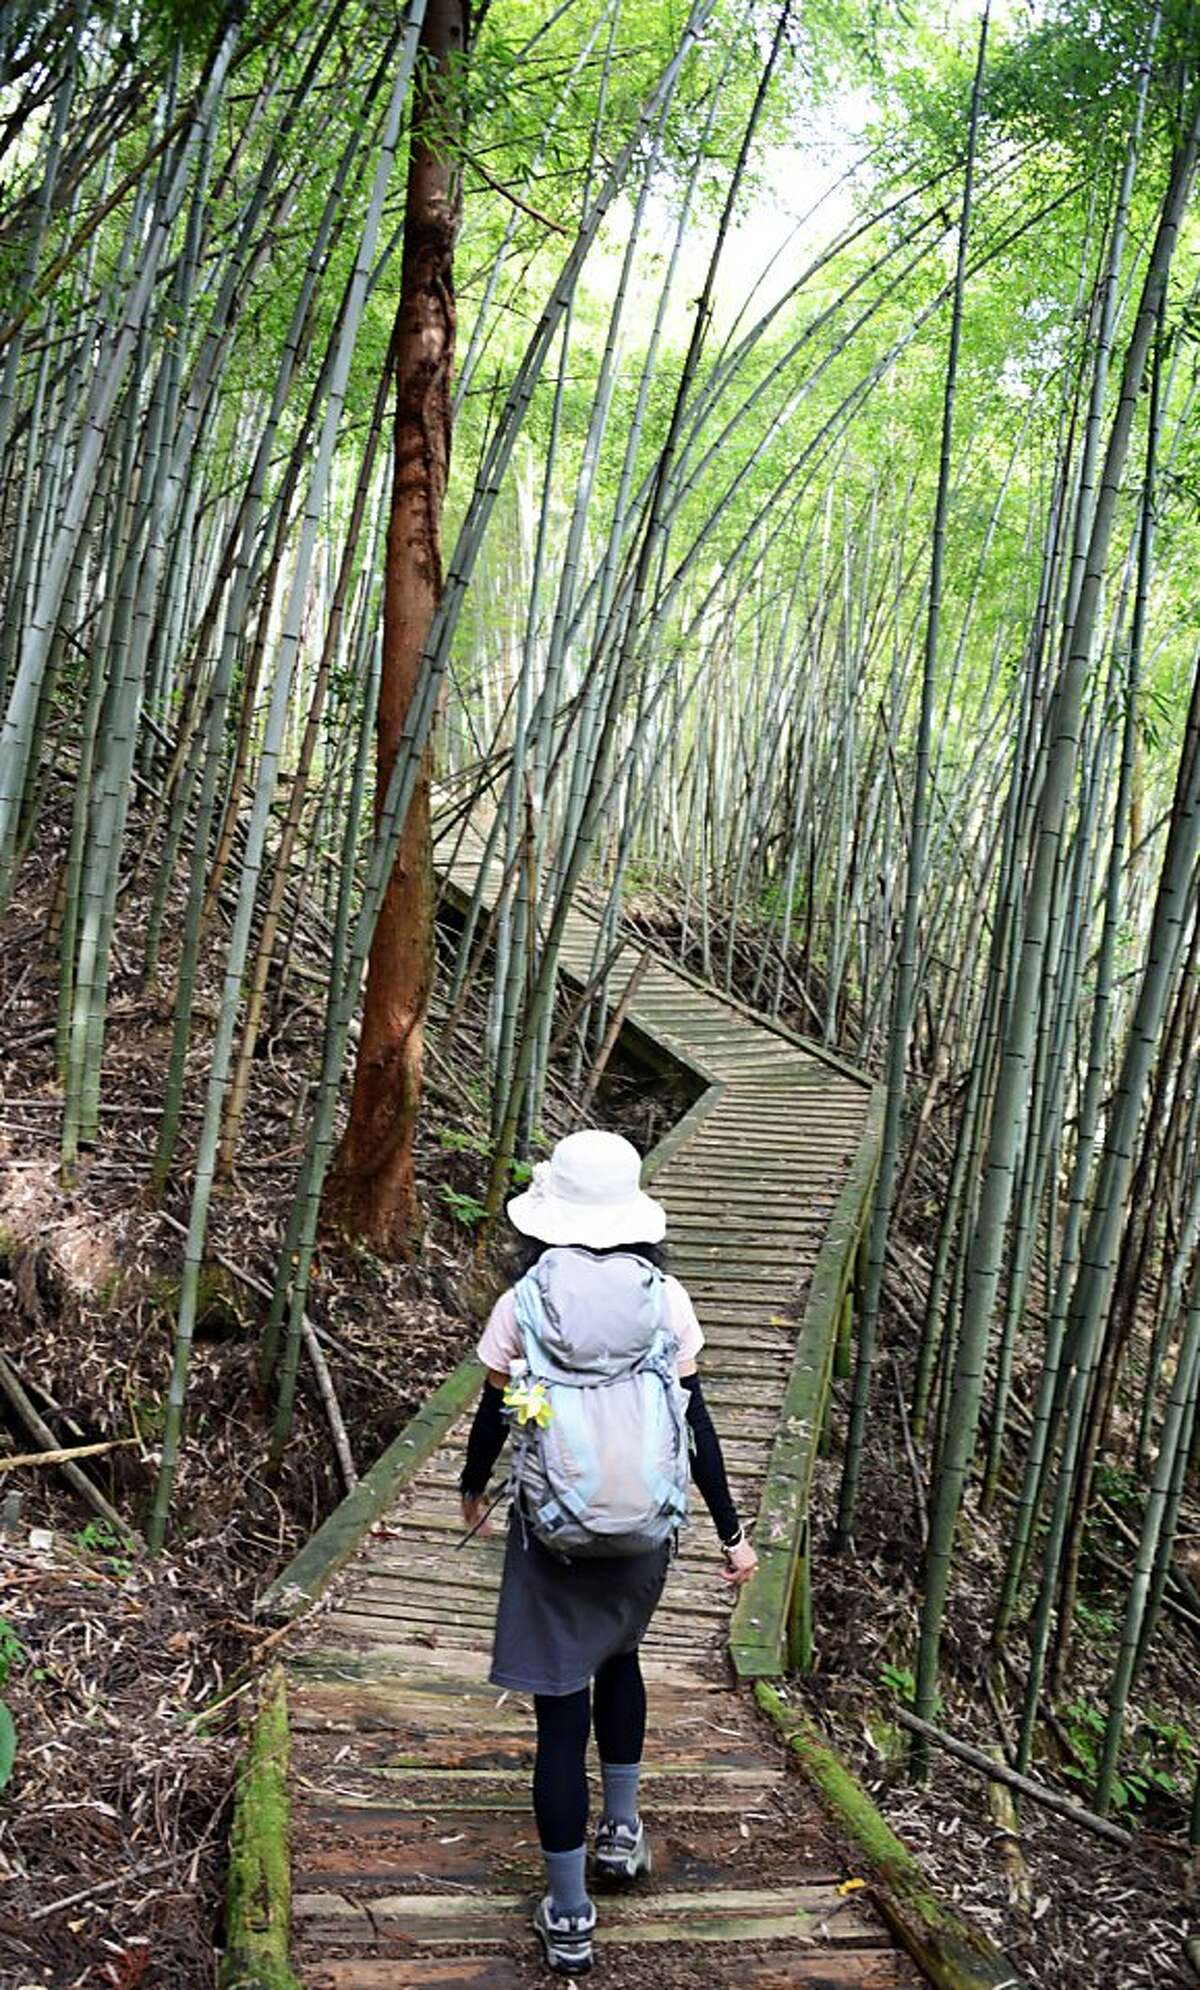 A bamboo thicket surrounds a hiker passing through the Nakasendo trail.